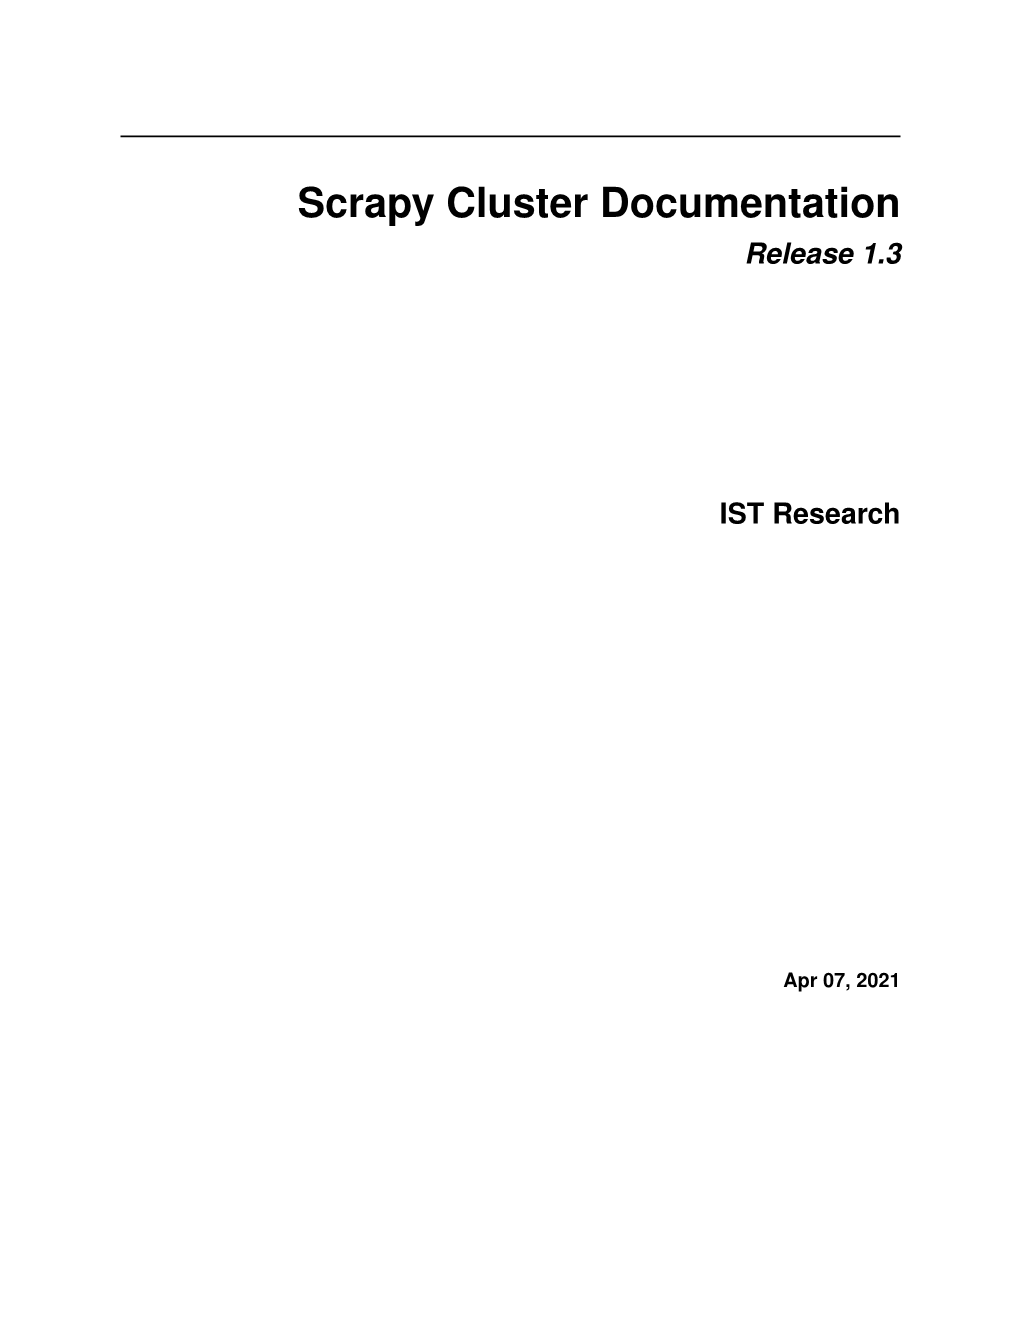 Scrapy Cluster Documentation Release 1.3